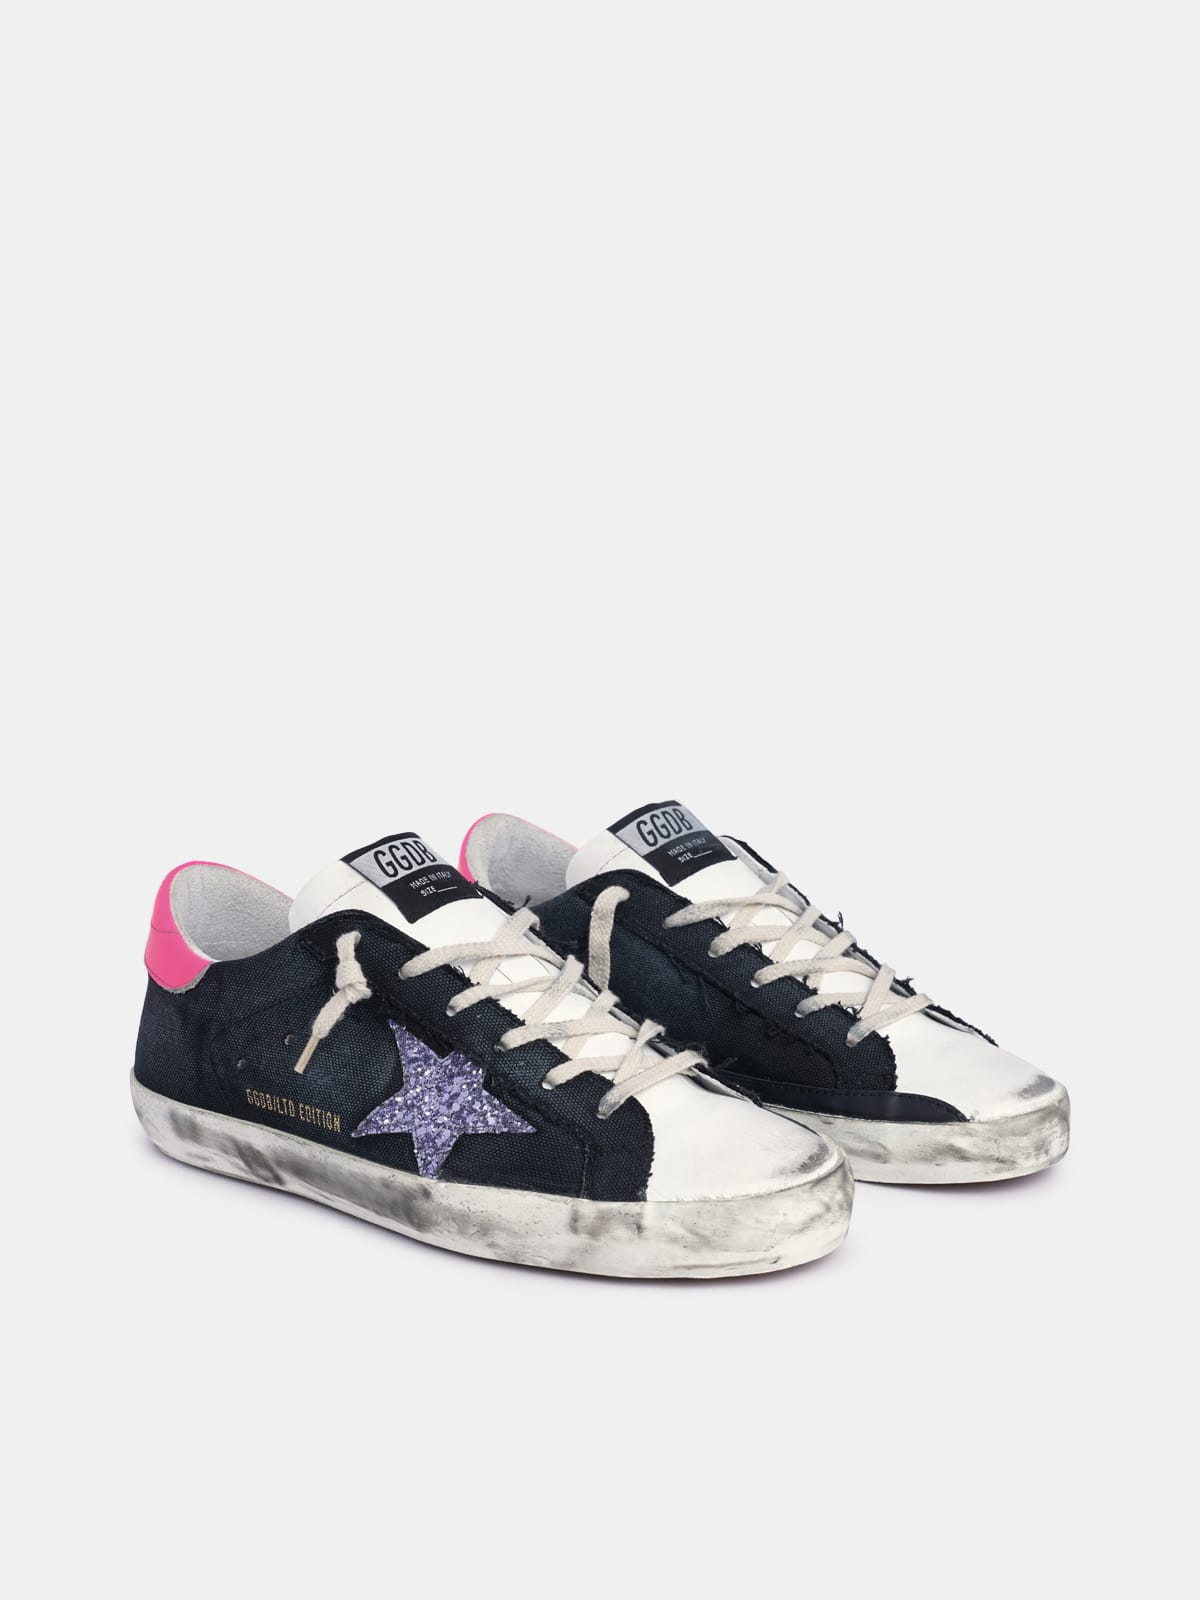 Golden Goose - Super-Star sneakers with purple glitter star and fuchsia heel tab in 